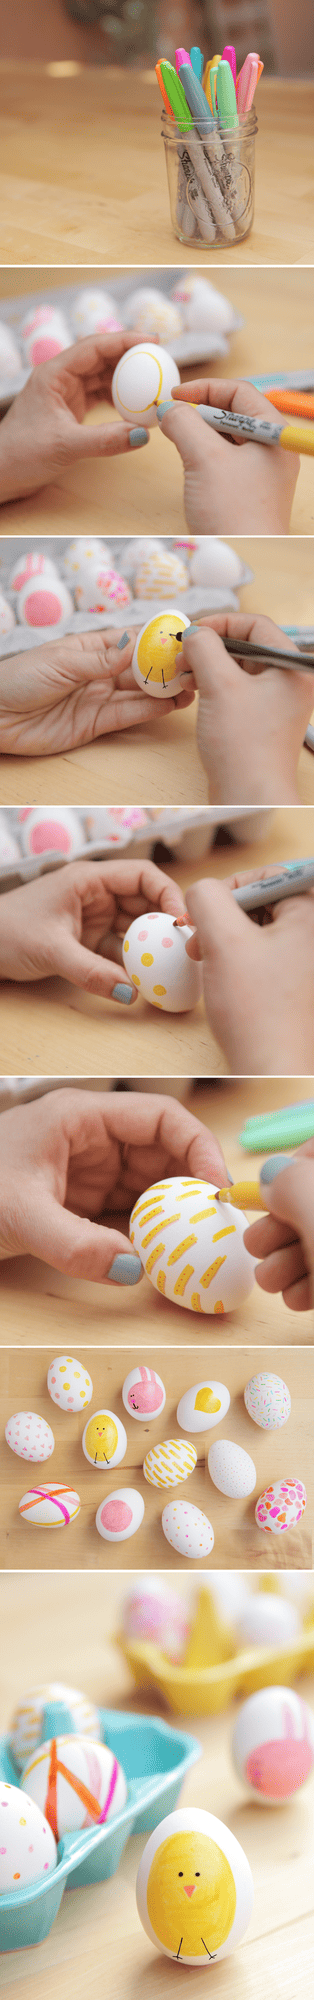 Easter Egg Decorating with sharpies. Fun way to be creative!